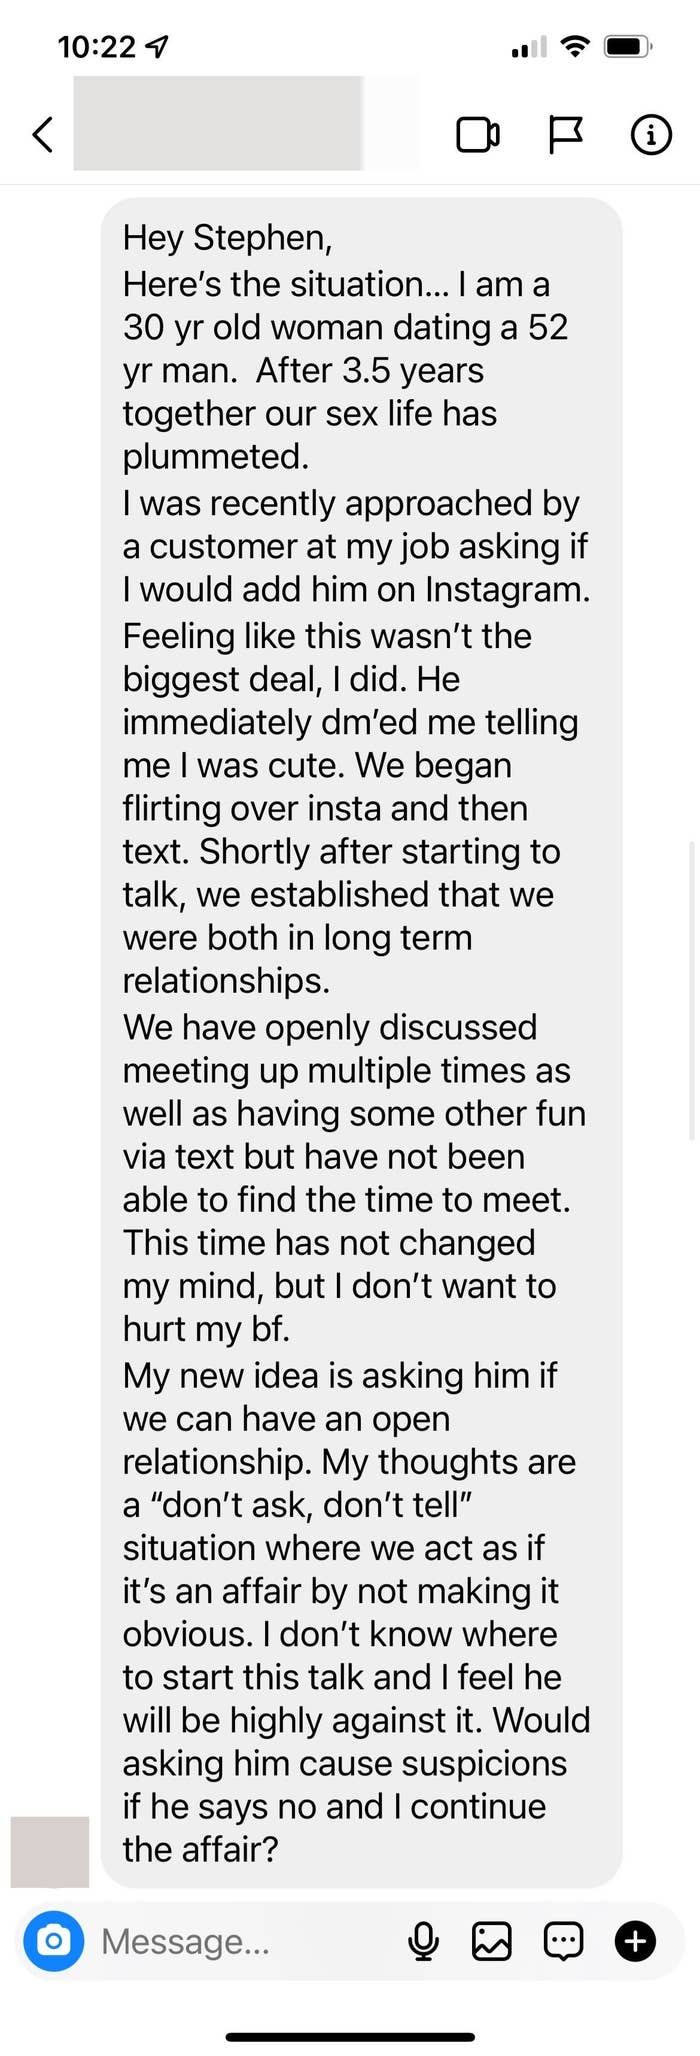 the message from a 30 year old woman saying that she&#x27;s been flirting with someone but wants to know if she should ask her 52 year old boyfriend if they should be in an open relationship before meeting this new guy